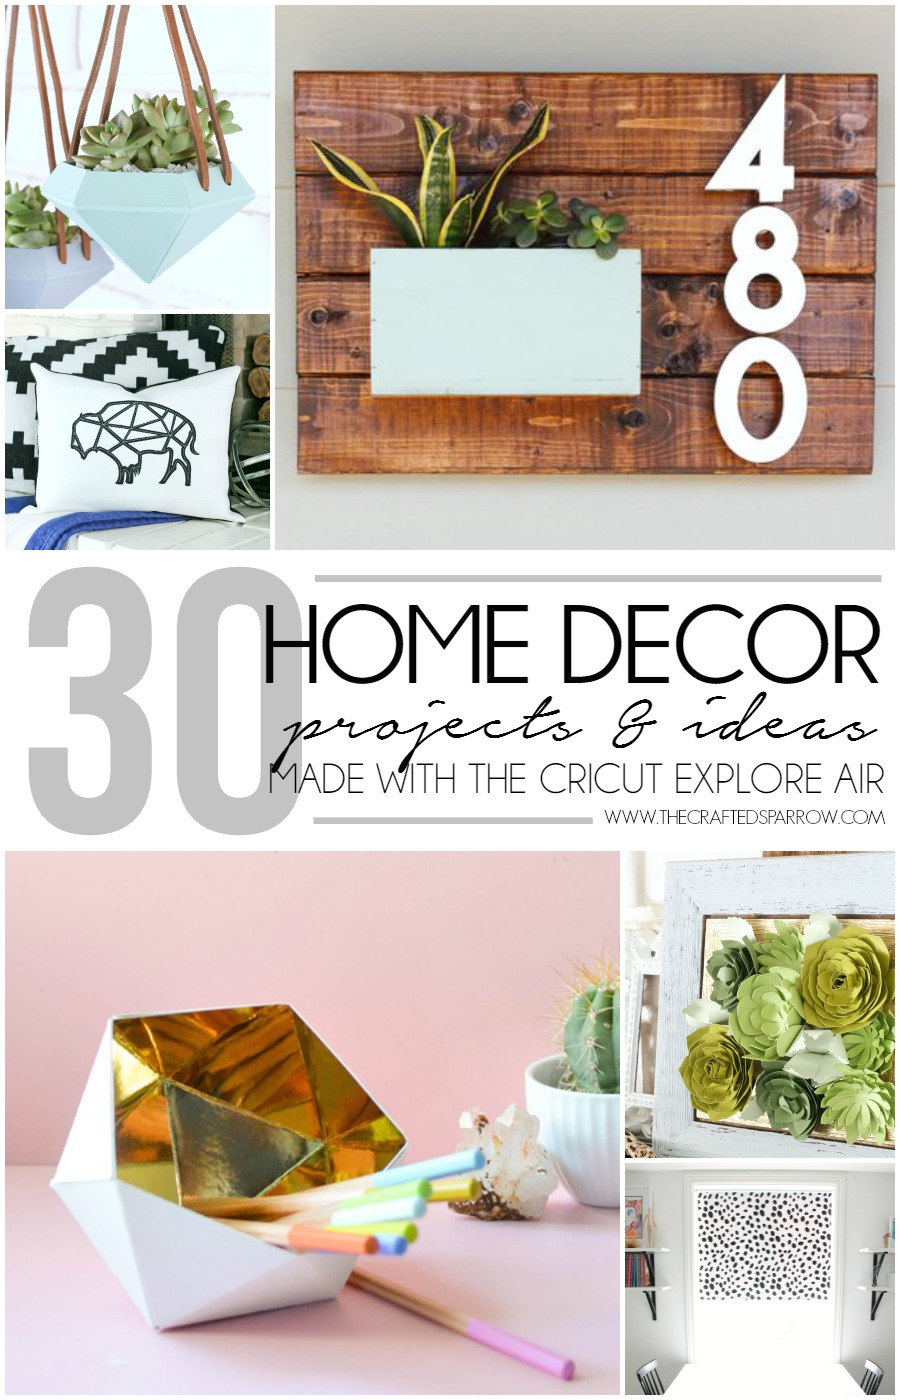 https://www.thecraftedsparrow.com/wp-content/uploads/2015/05/30-Home-Decor-Projects-Made-with-the-Cricut-Explore-Air1.jpg